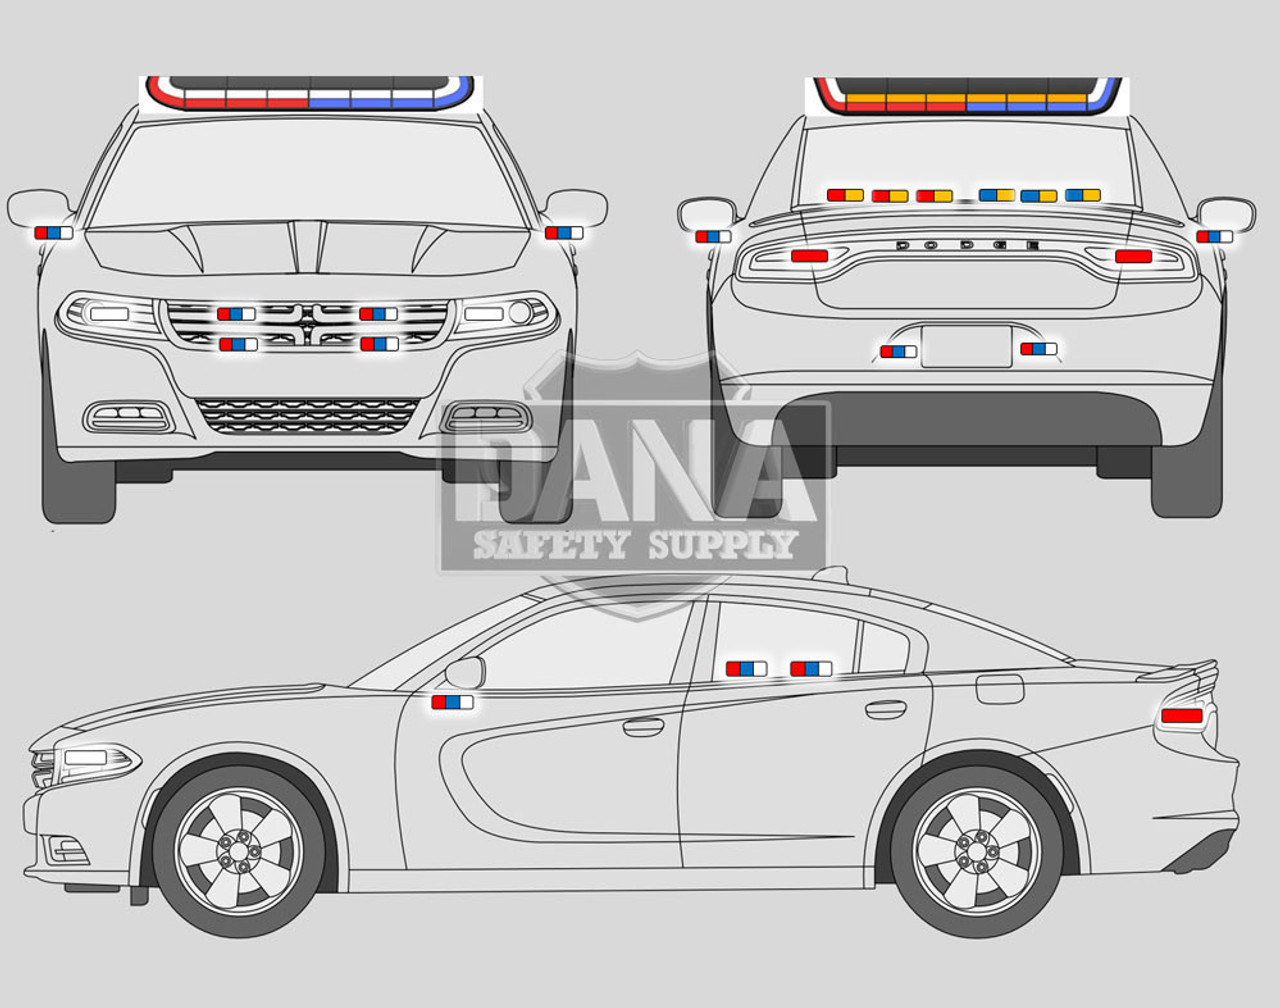 New 2023 AWD V6 Black Dodge Charger PPV ready to be built as a Marked Patrol Package Police Pursuit Car (Emergency Lighting, Siren, Controller, Partition, Window Bars, etc.), + Delivery, B-MPV6-5